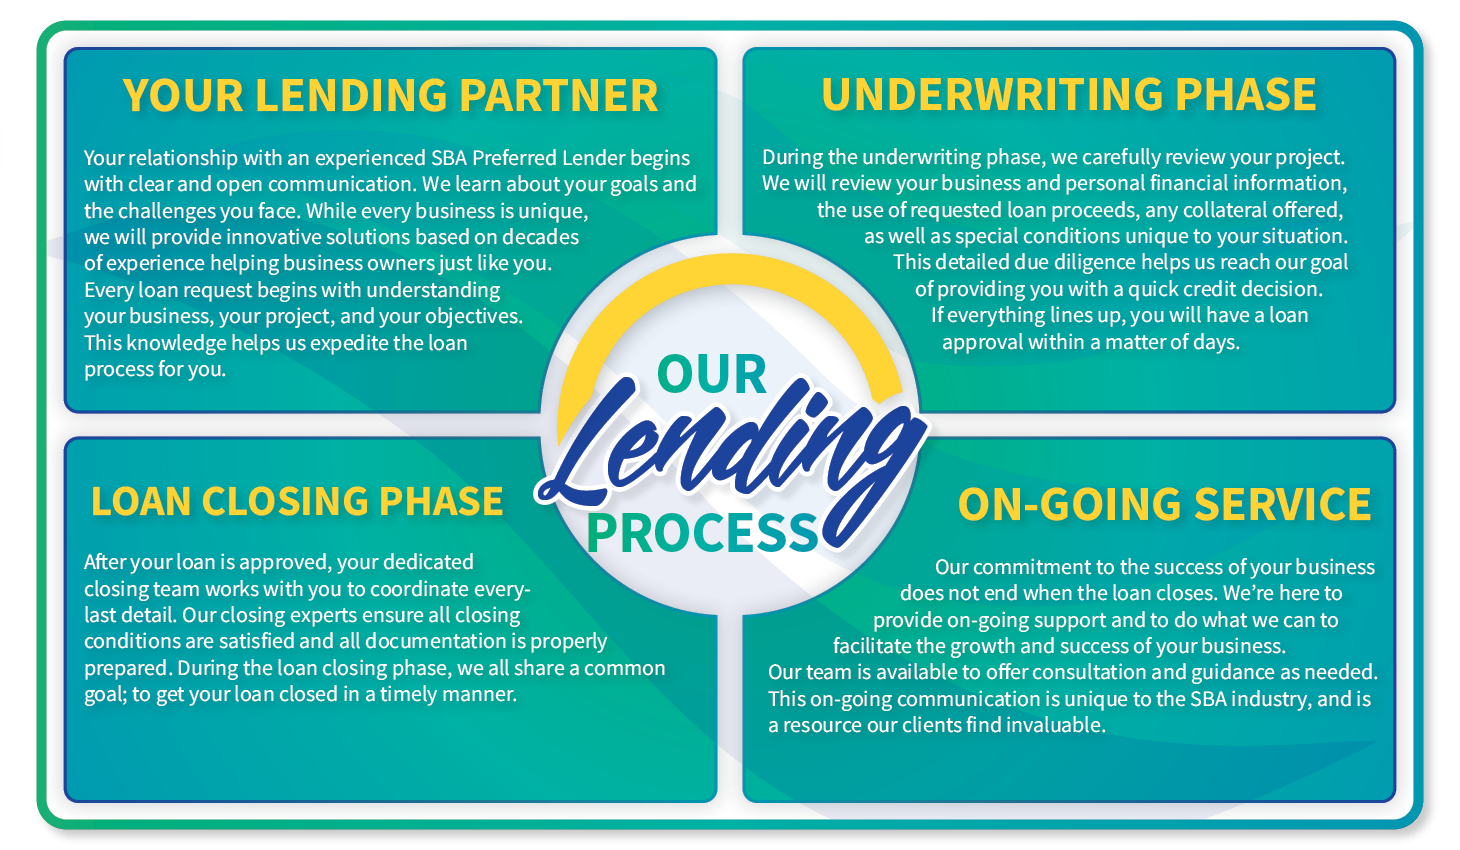 Our Lending Process. Underwriting, Loan Closing & Ongoing Service